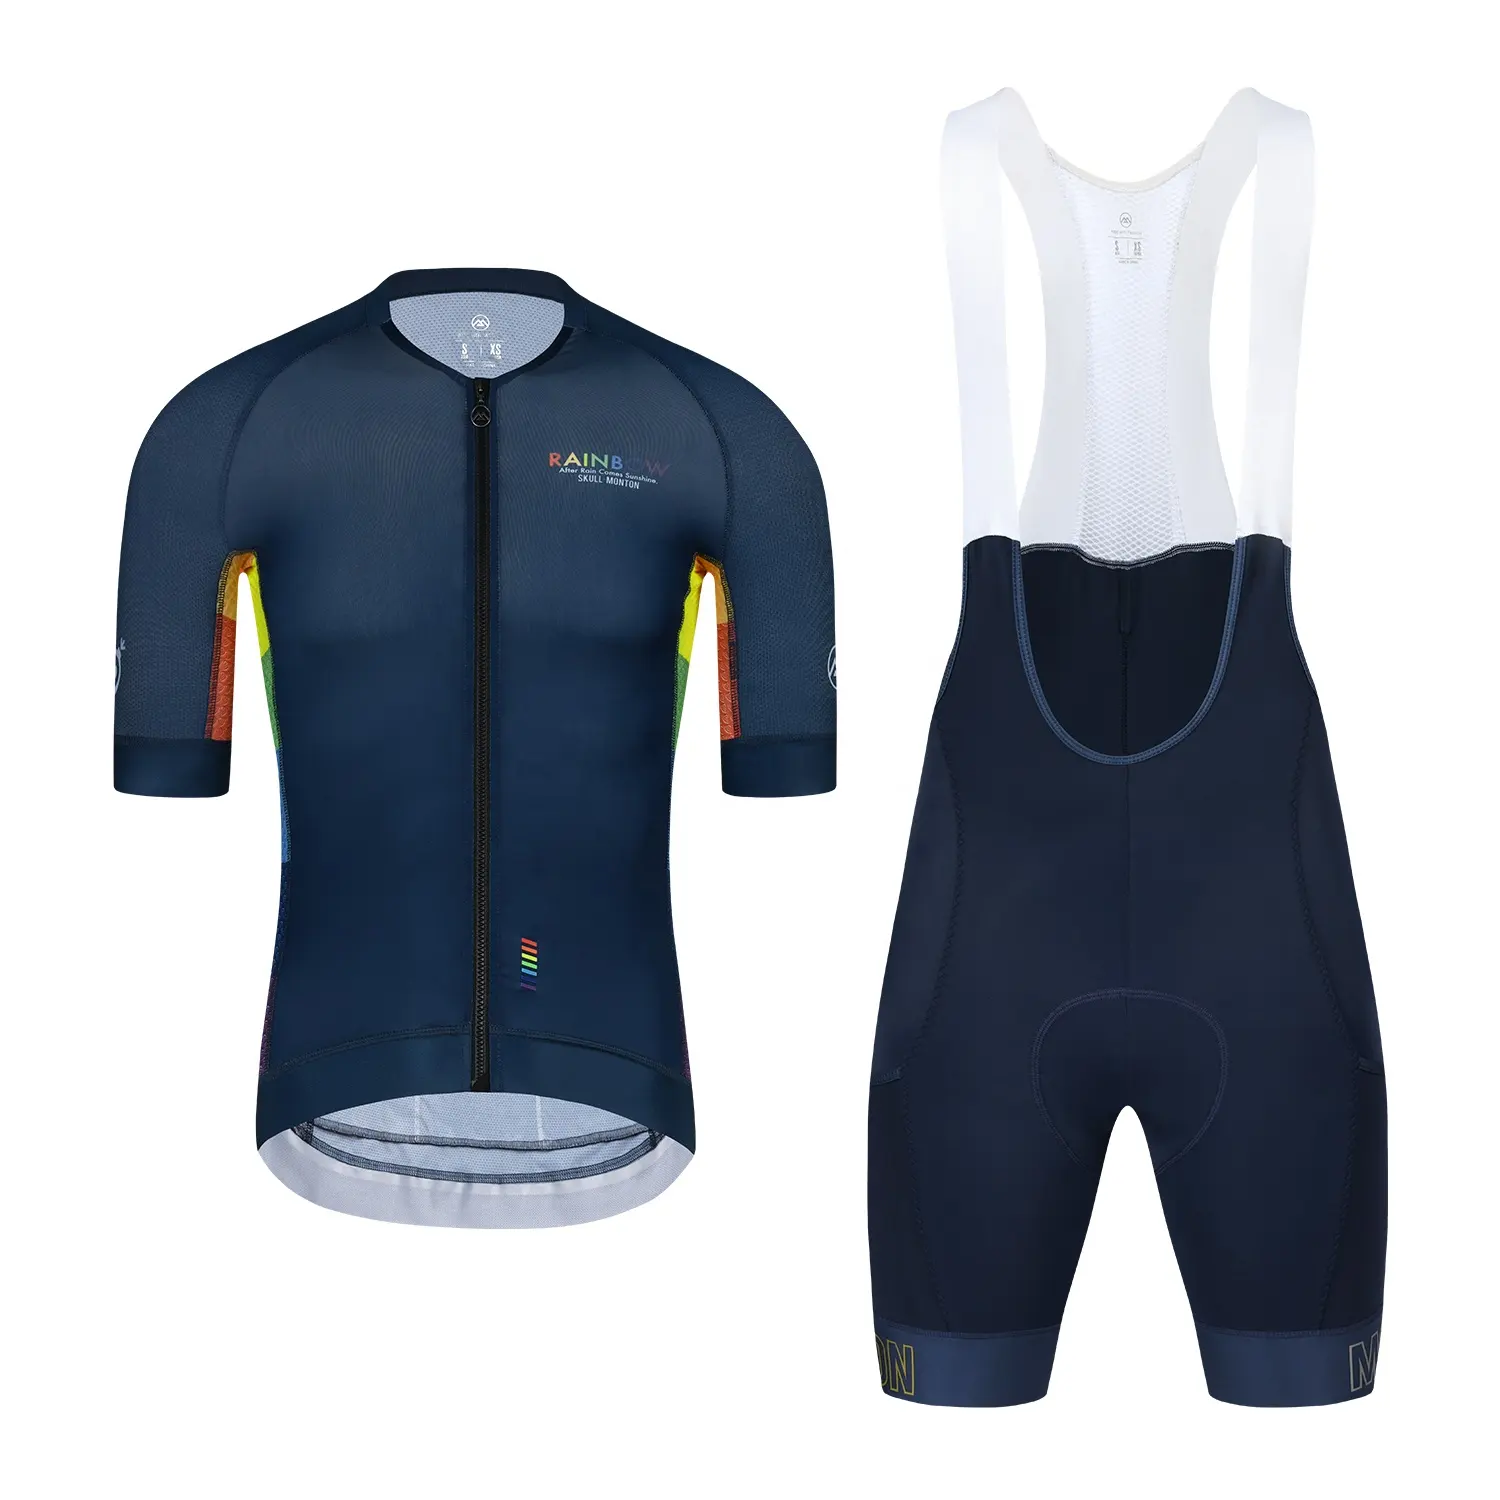 Monton Cycling Set Cycle Jersey Bicycle Clothing Fabric Men Jersey Cycling Wear